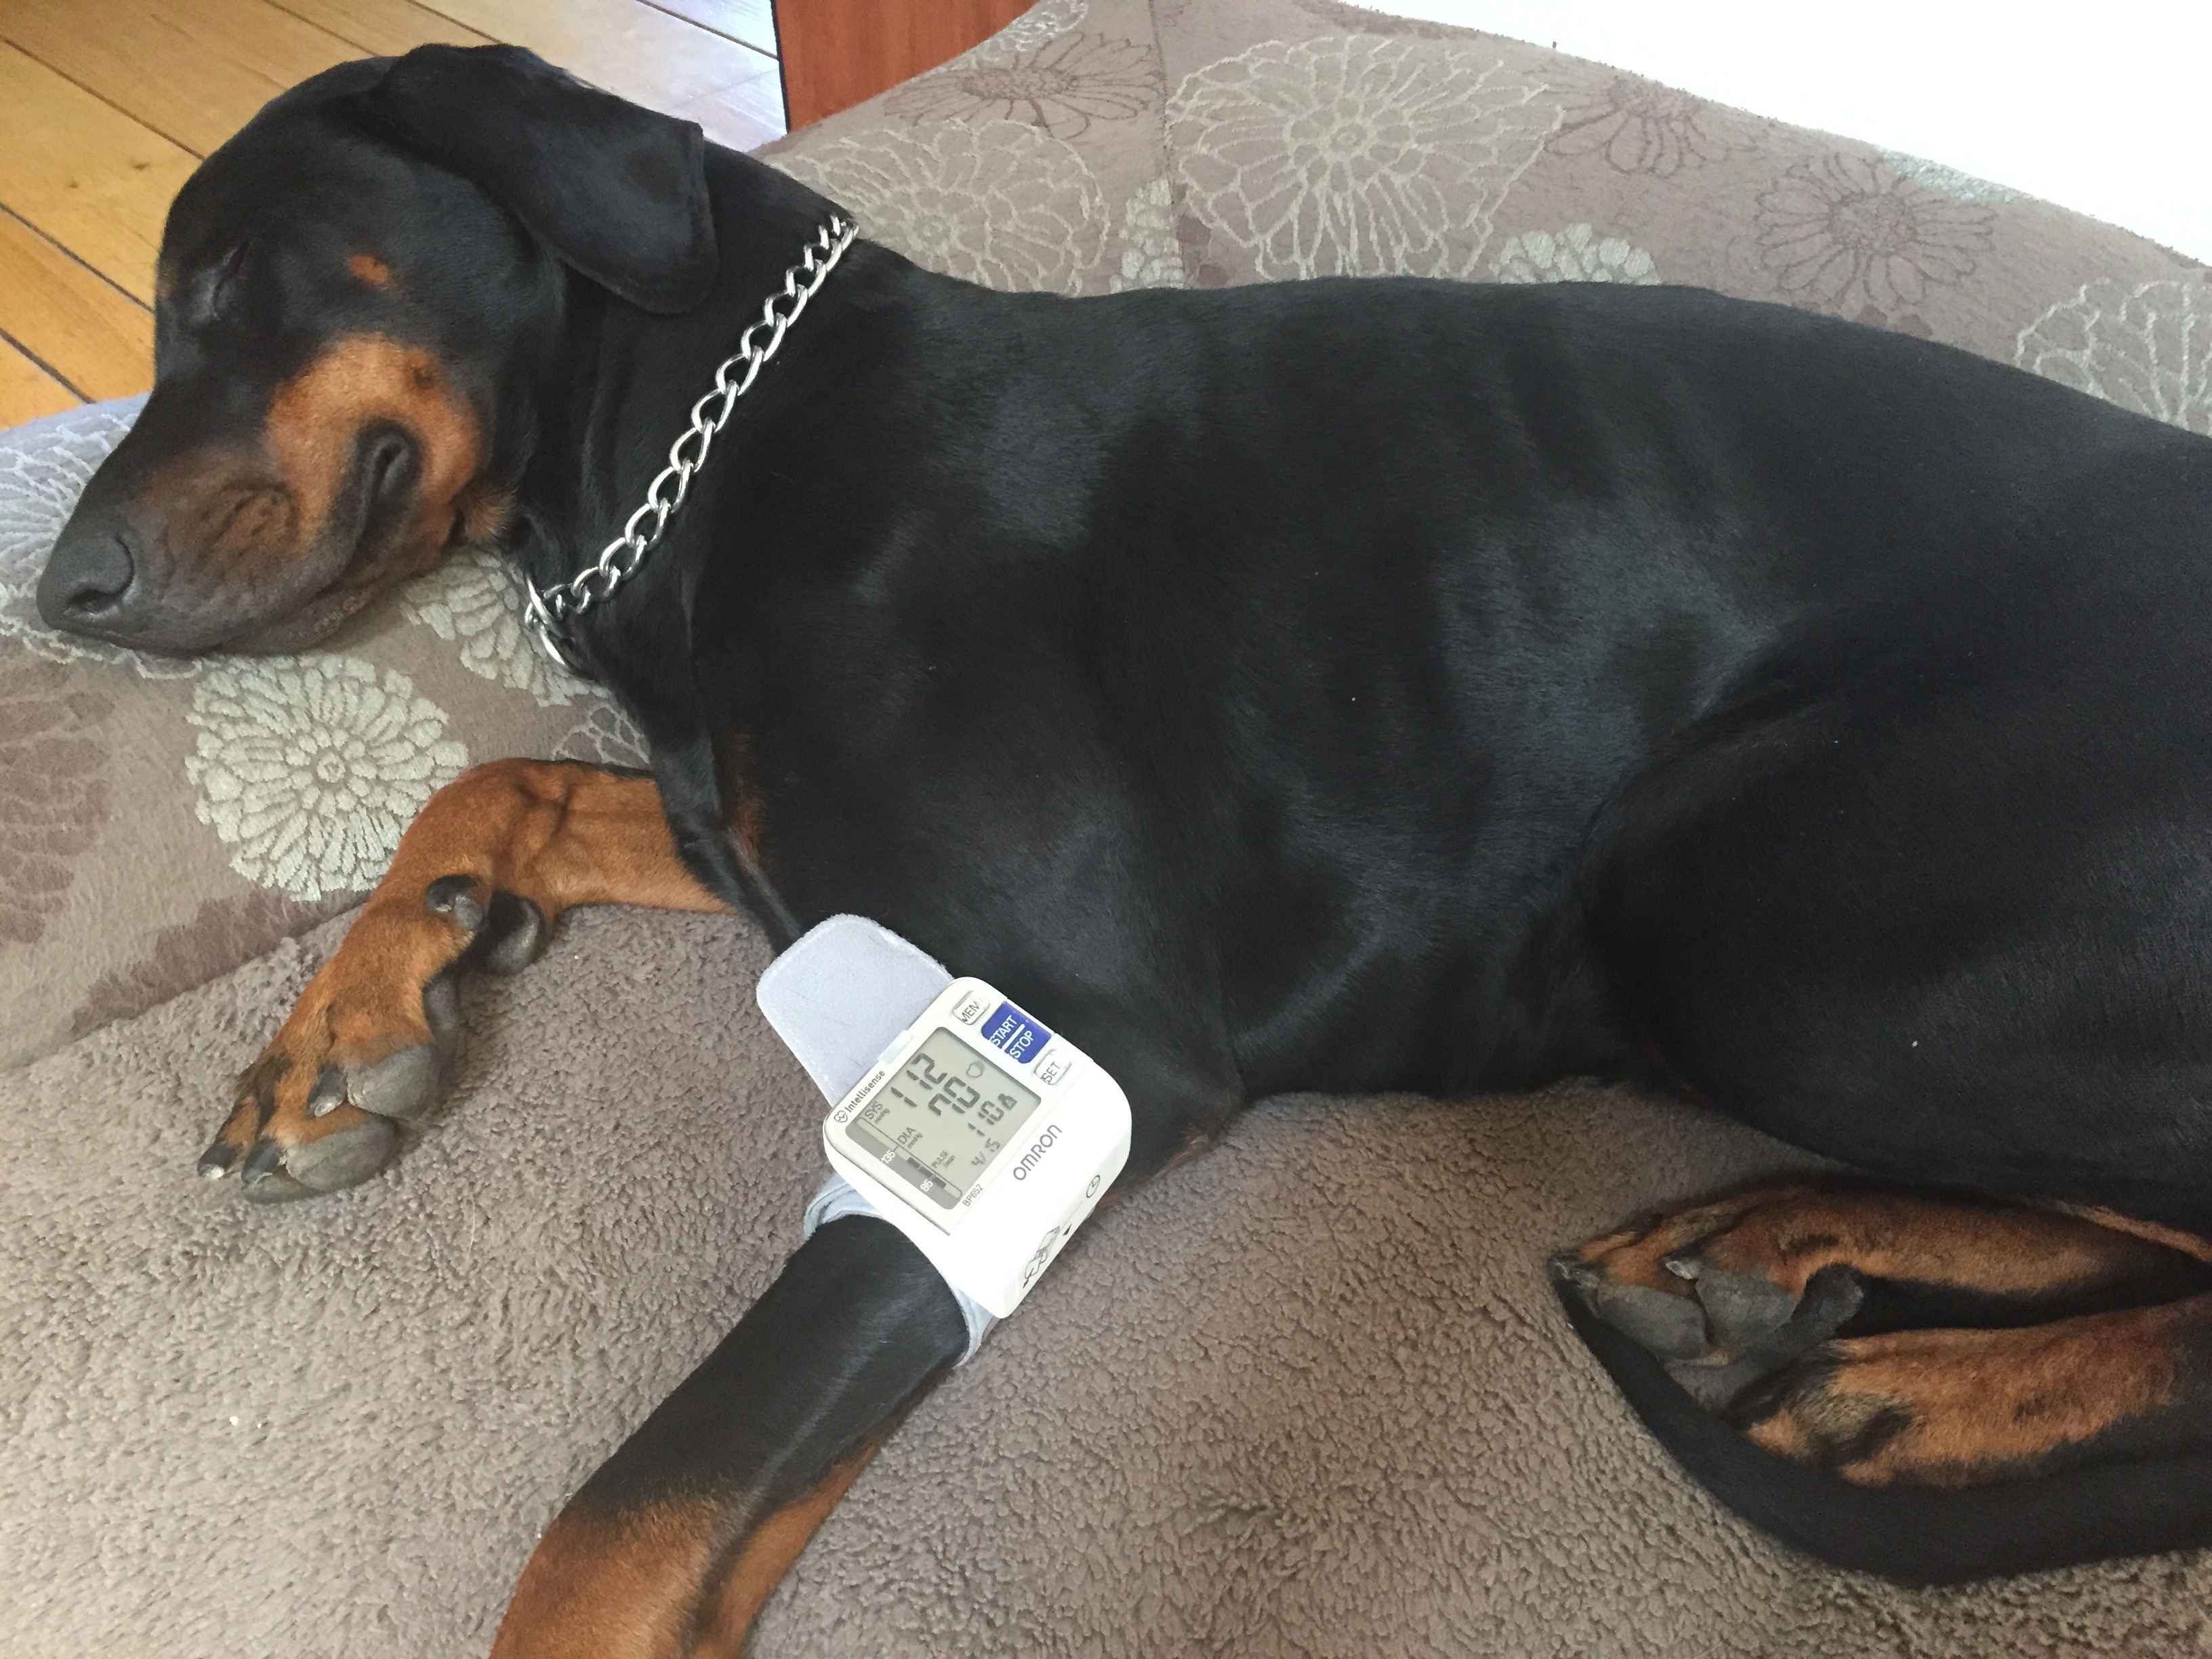 How to measure blood pressure in dogs at home